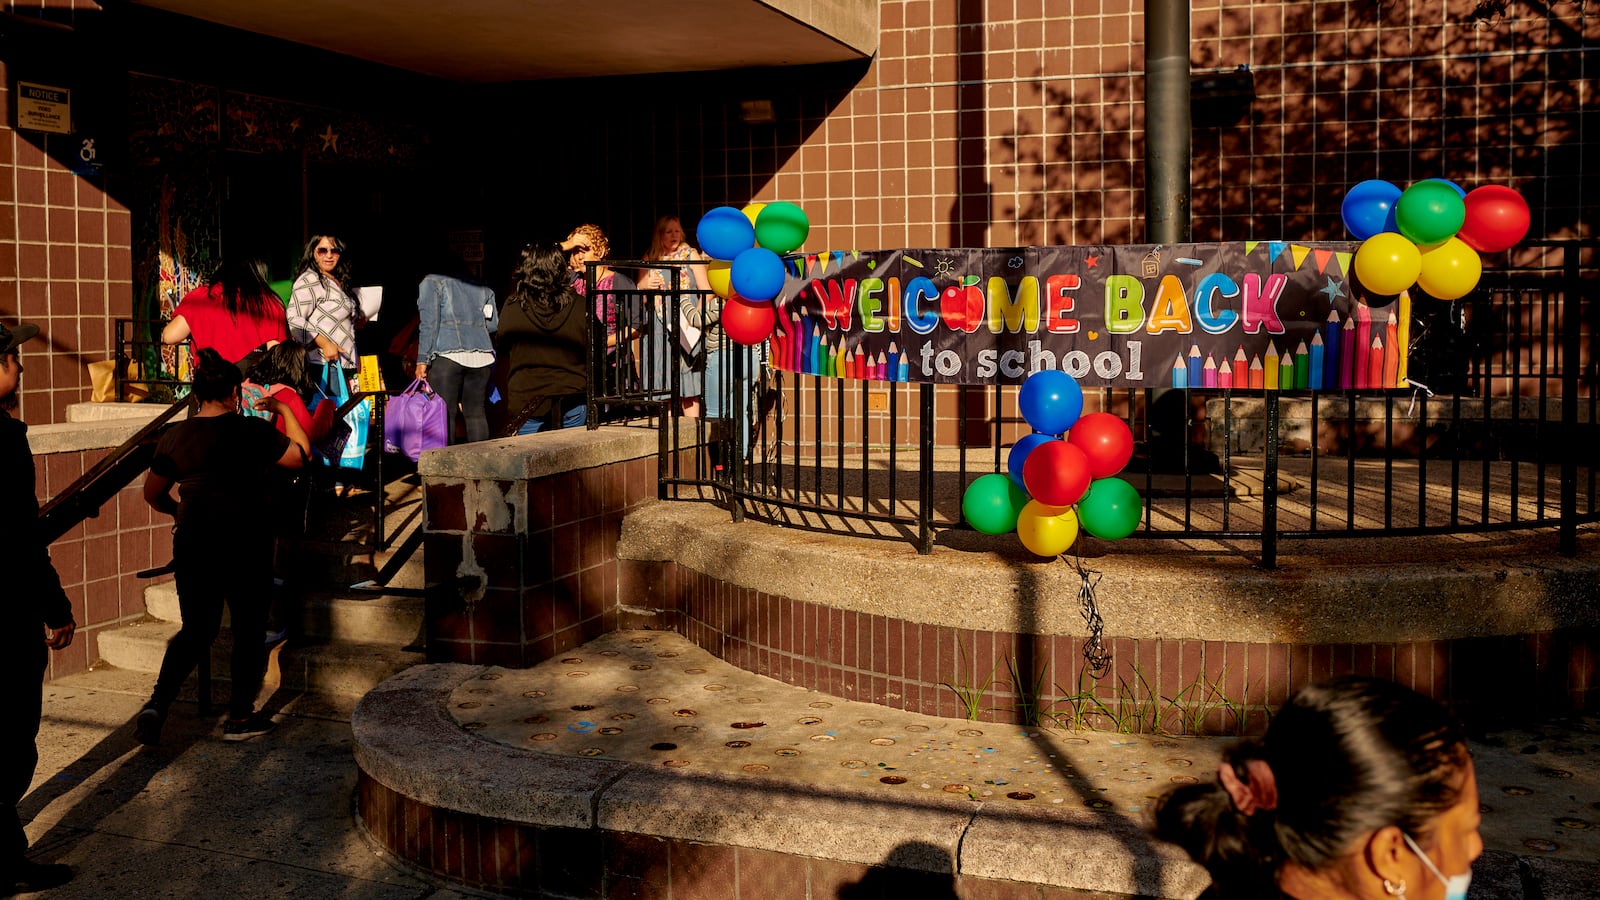 A sign reads “Welcome Back to School” outside of a large brick building as students walk into its doors.